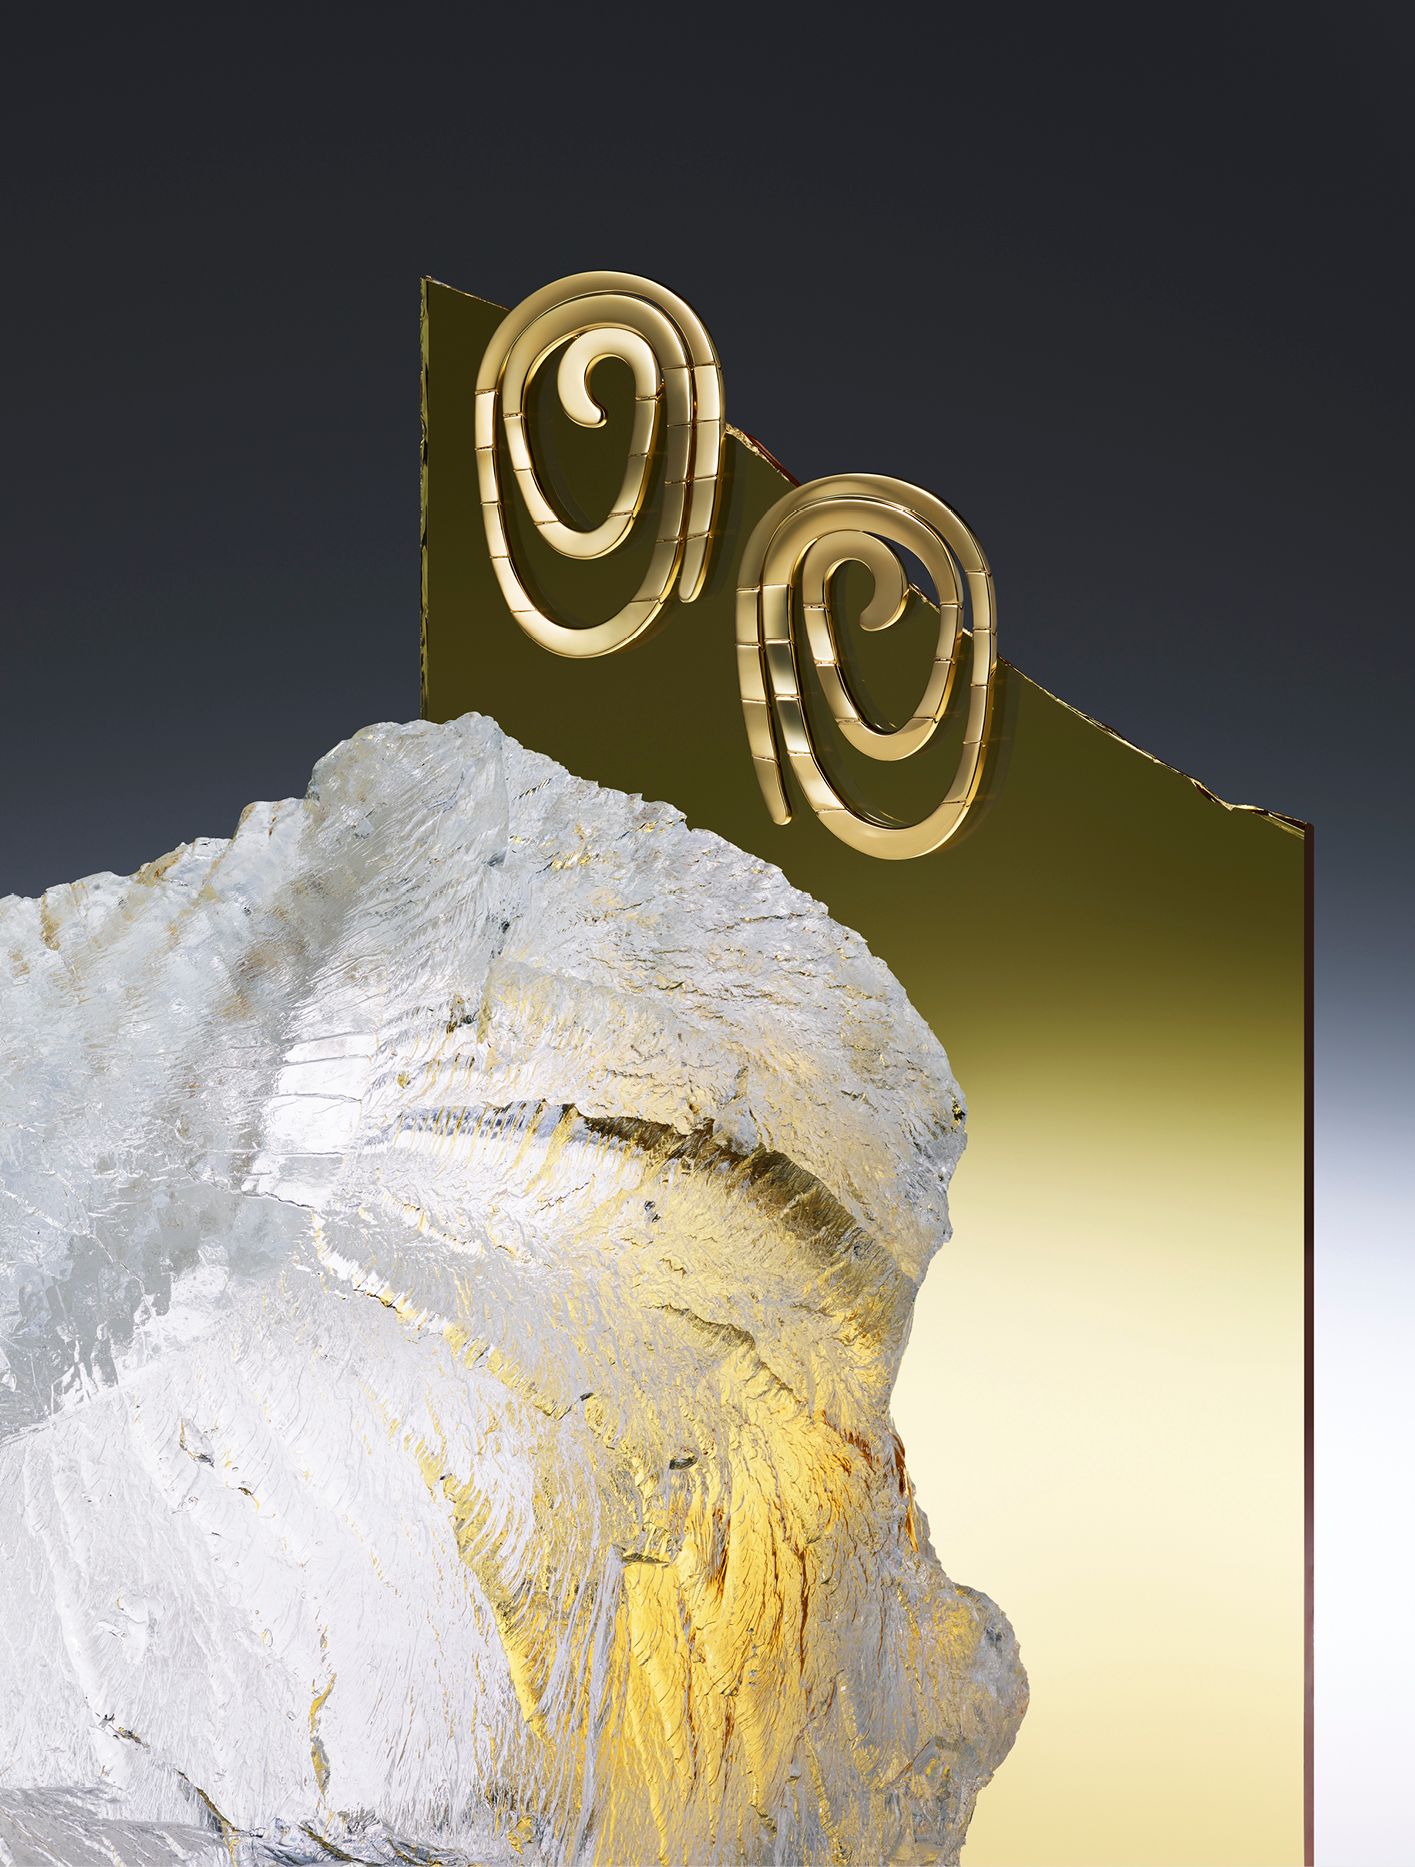 Jessica McCormack Carmela Spiral earrings in 18ct yellow gold, £7,000, jessicamccormack.com